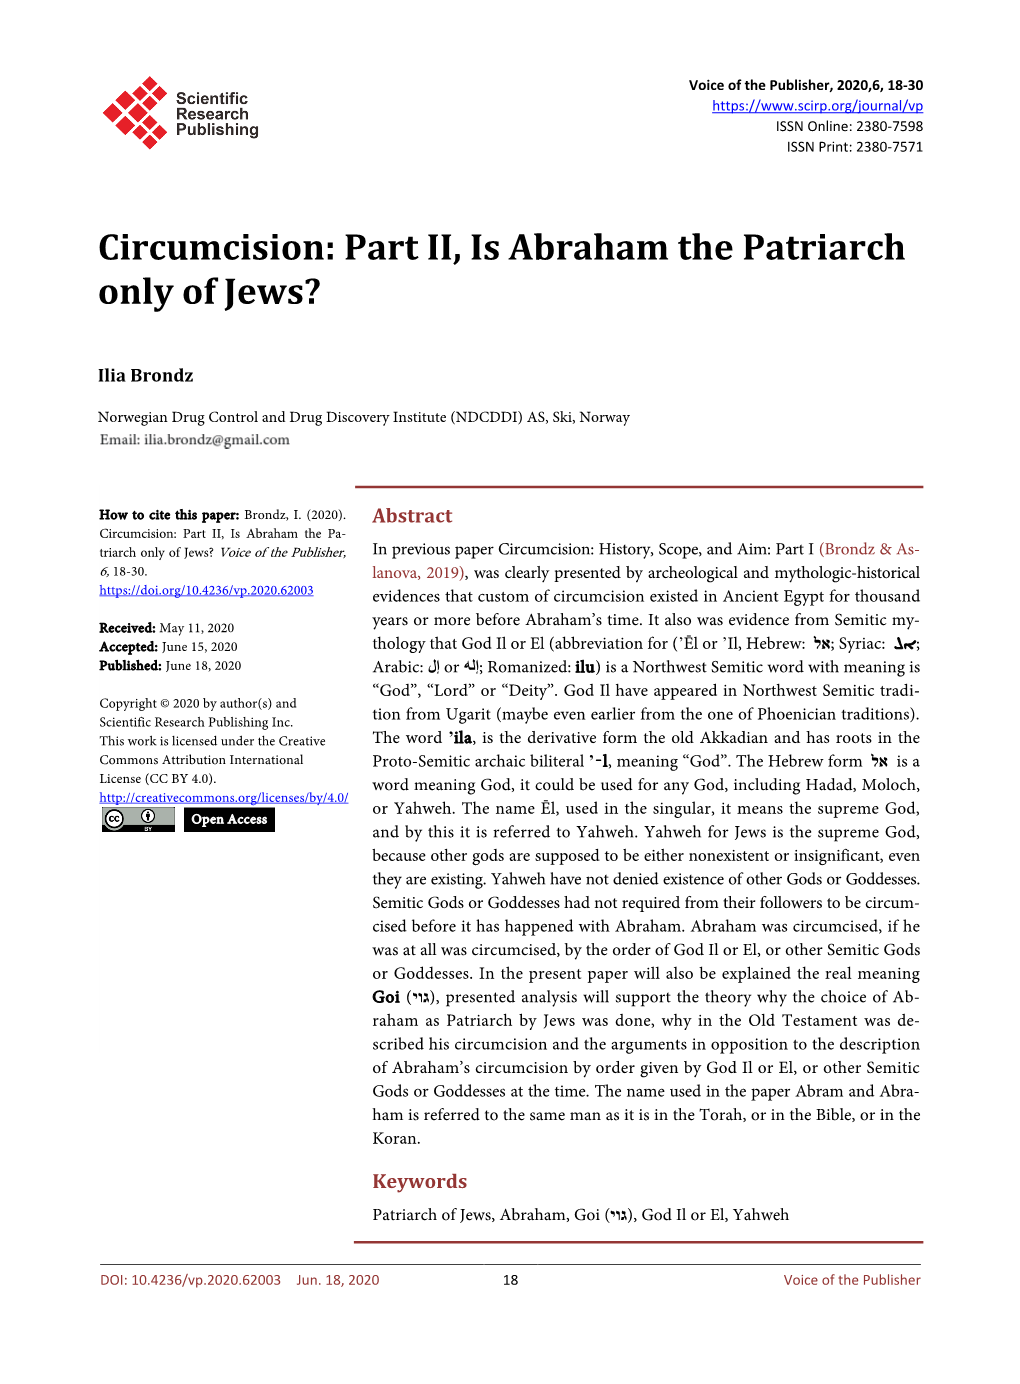 Circumcision: Part II, Is Abraham the Patriarch Only of Jews?